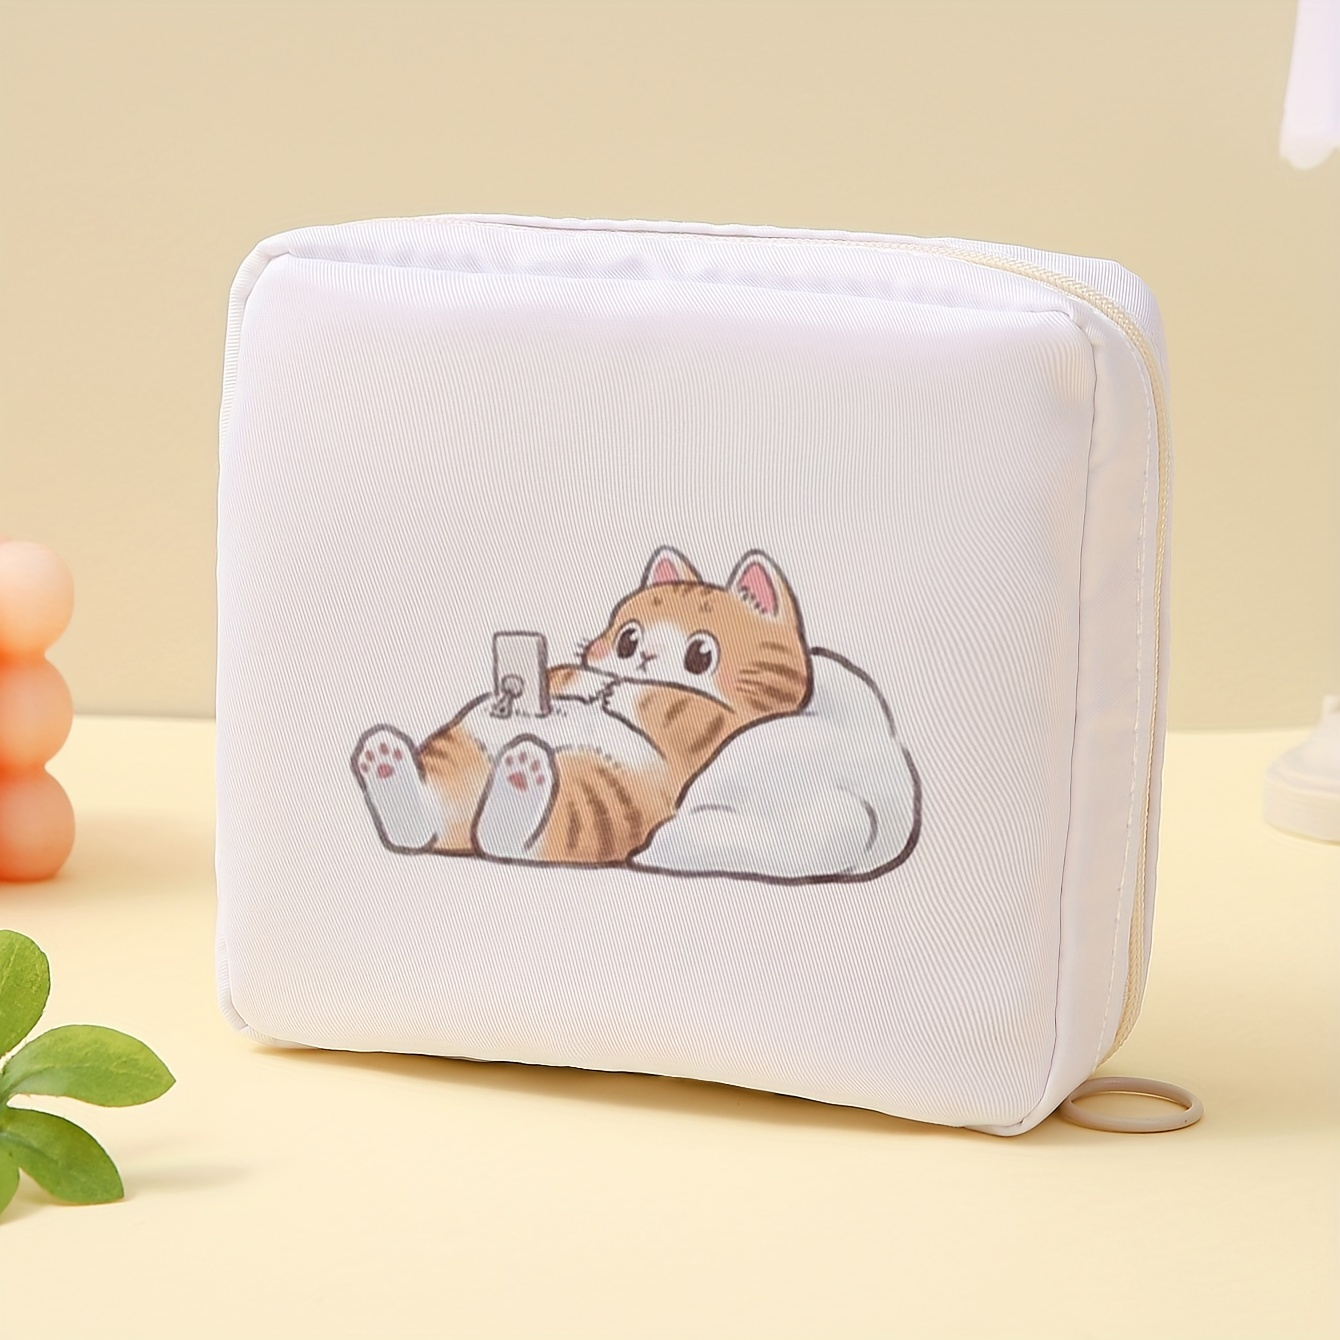 

Cute Cat Pattern Portable Sanitary Napkin Storage Bag, Candy And Miscellaneous Storage Bag, Lightweight And Multifunctional Bag